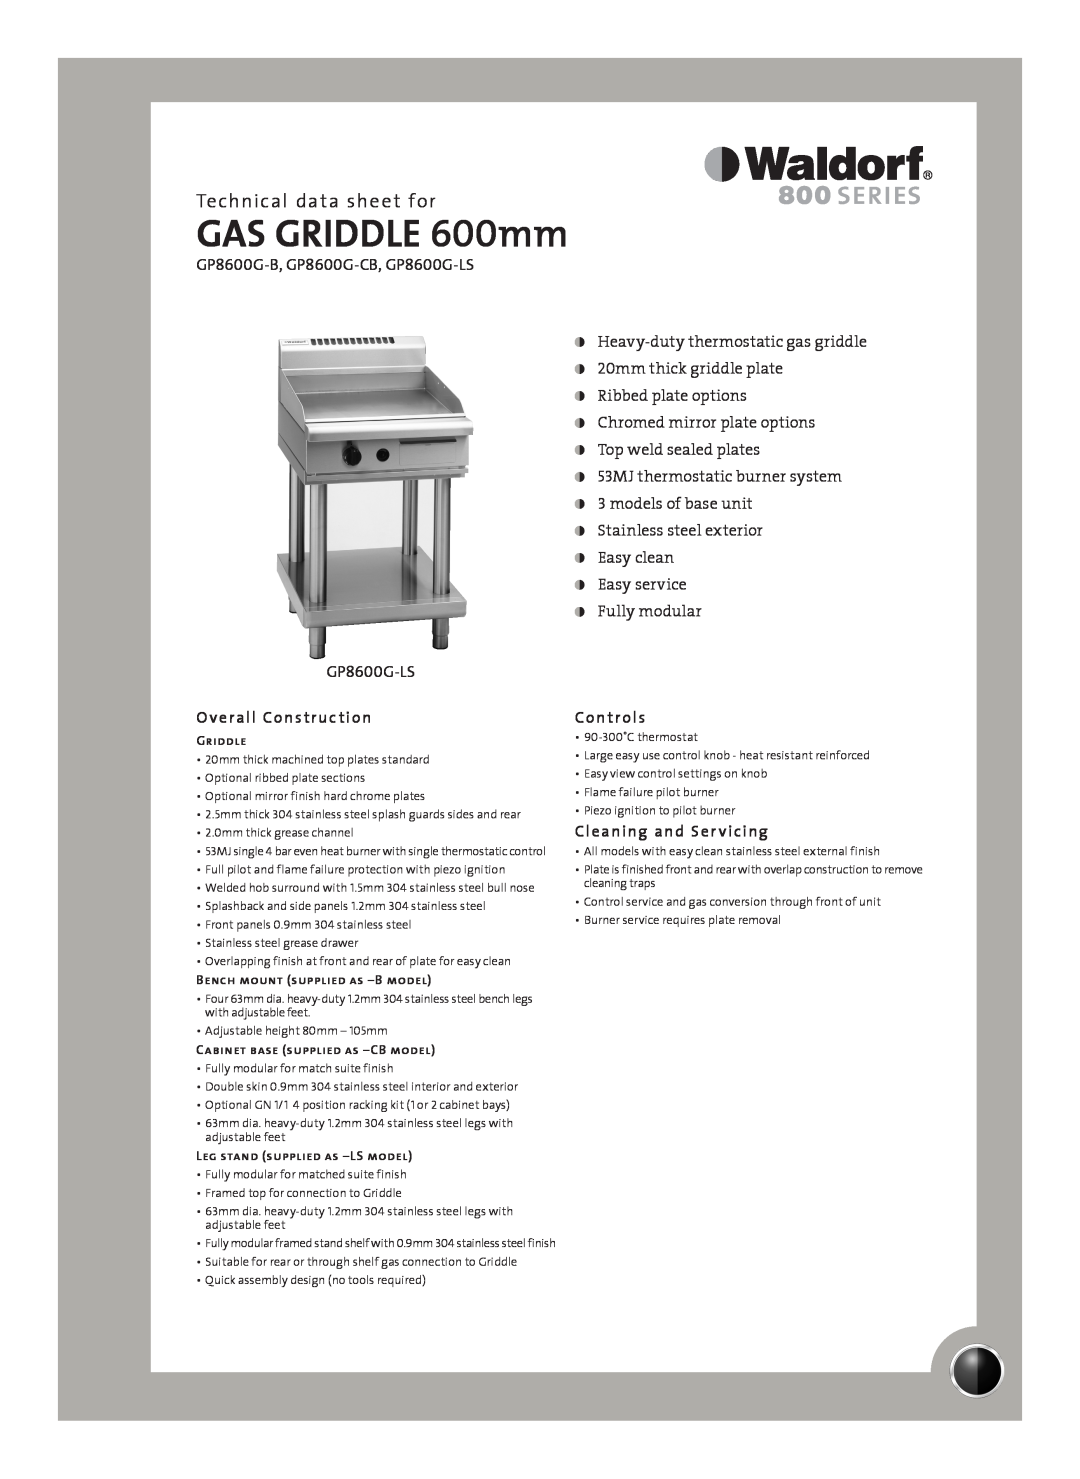 Moffat GP8600G-LS manual Technical data sheet for, Overall Construction, Controls, Cleaning and Ser vicing 